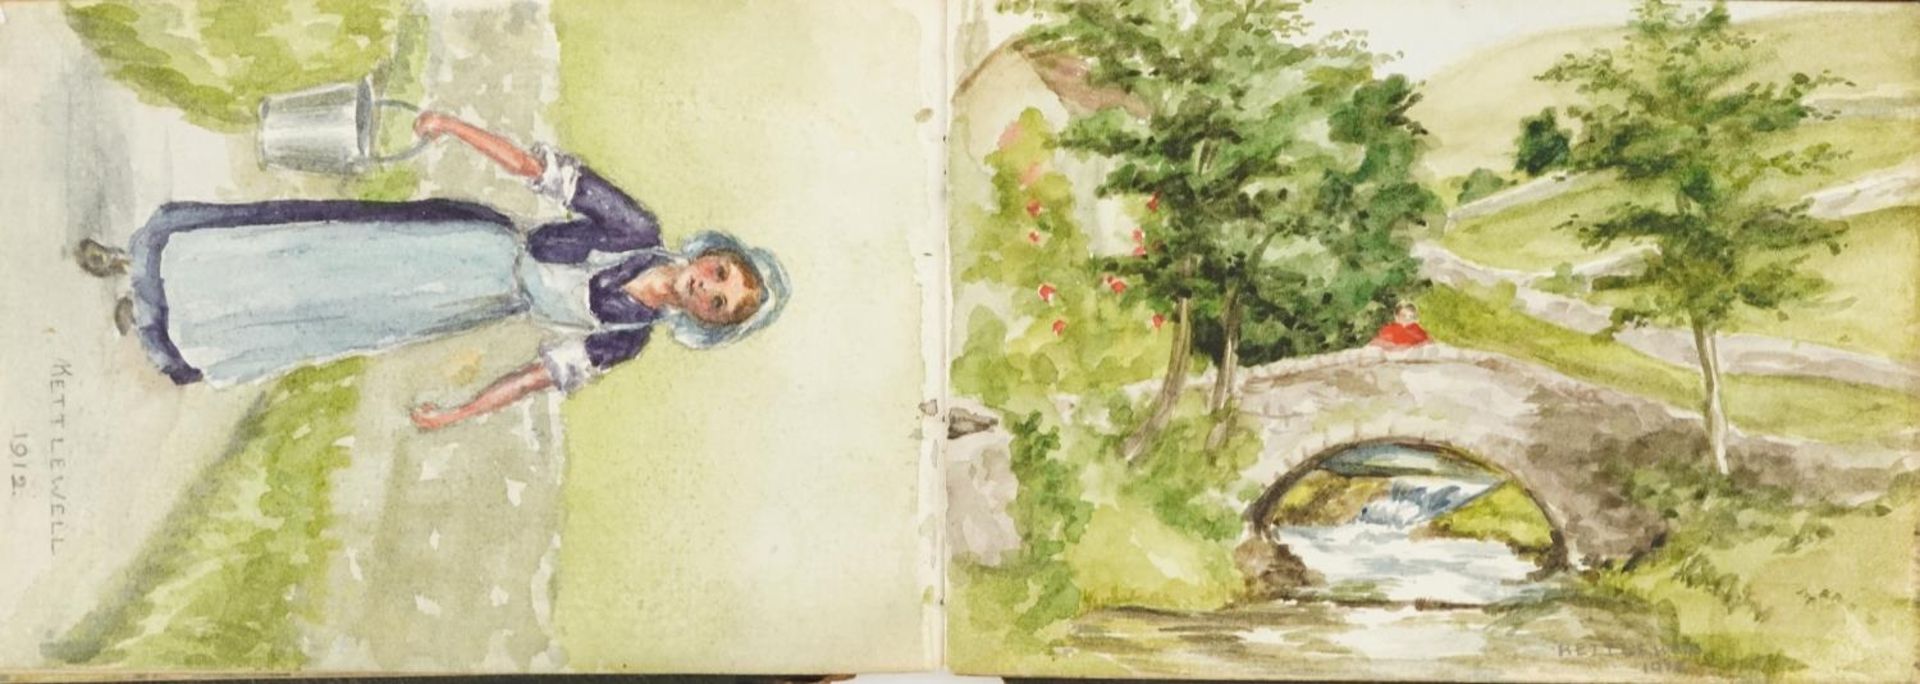 Early 20th century artist's travel sketchbook housing various watercolours and pencil sketches - Image 11 of 15